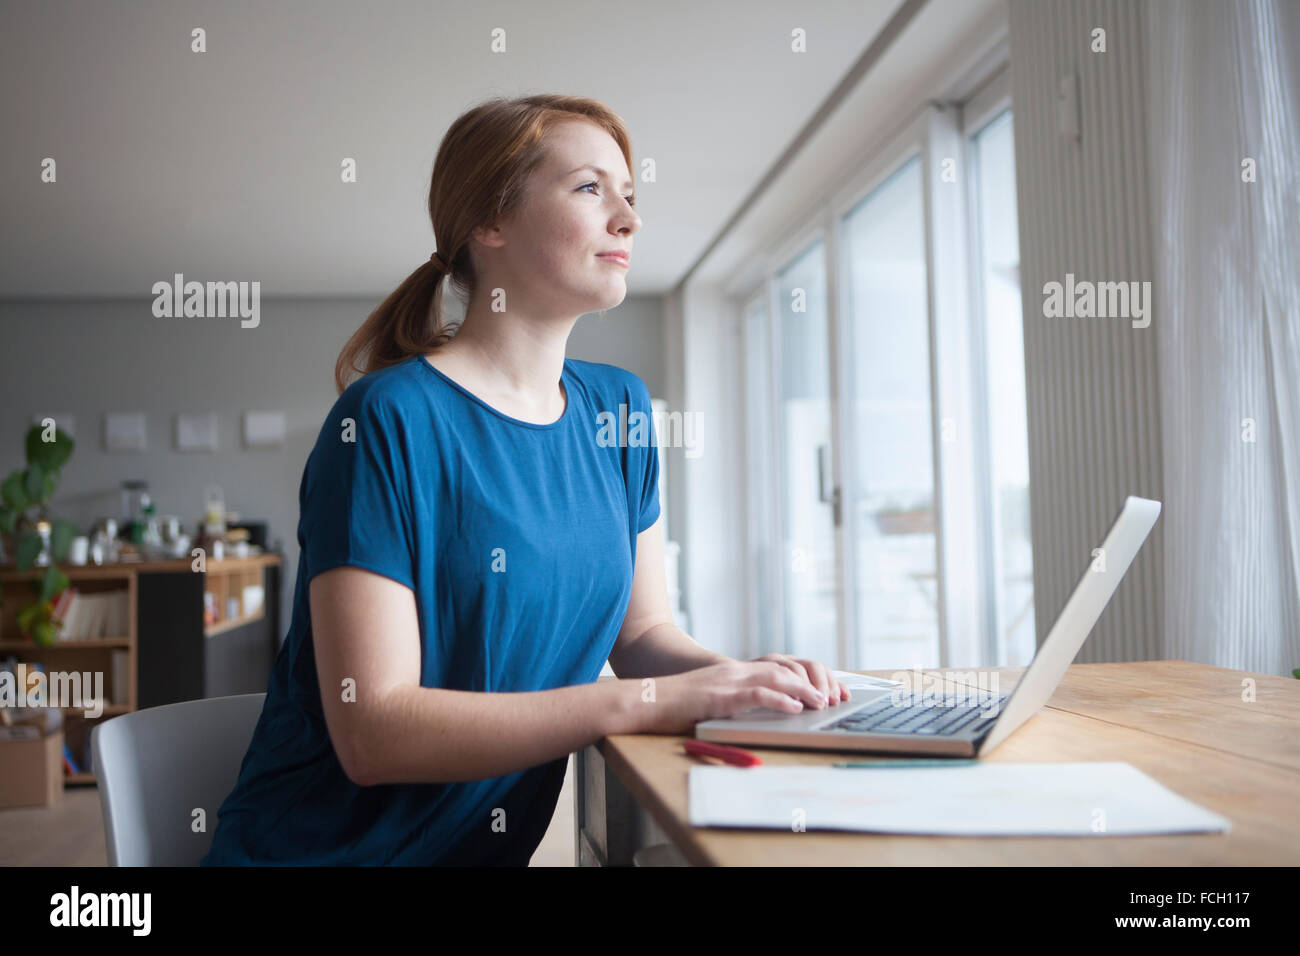 Young woman sitting at table   laptop Stock Photo